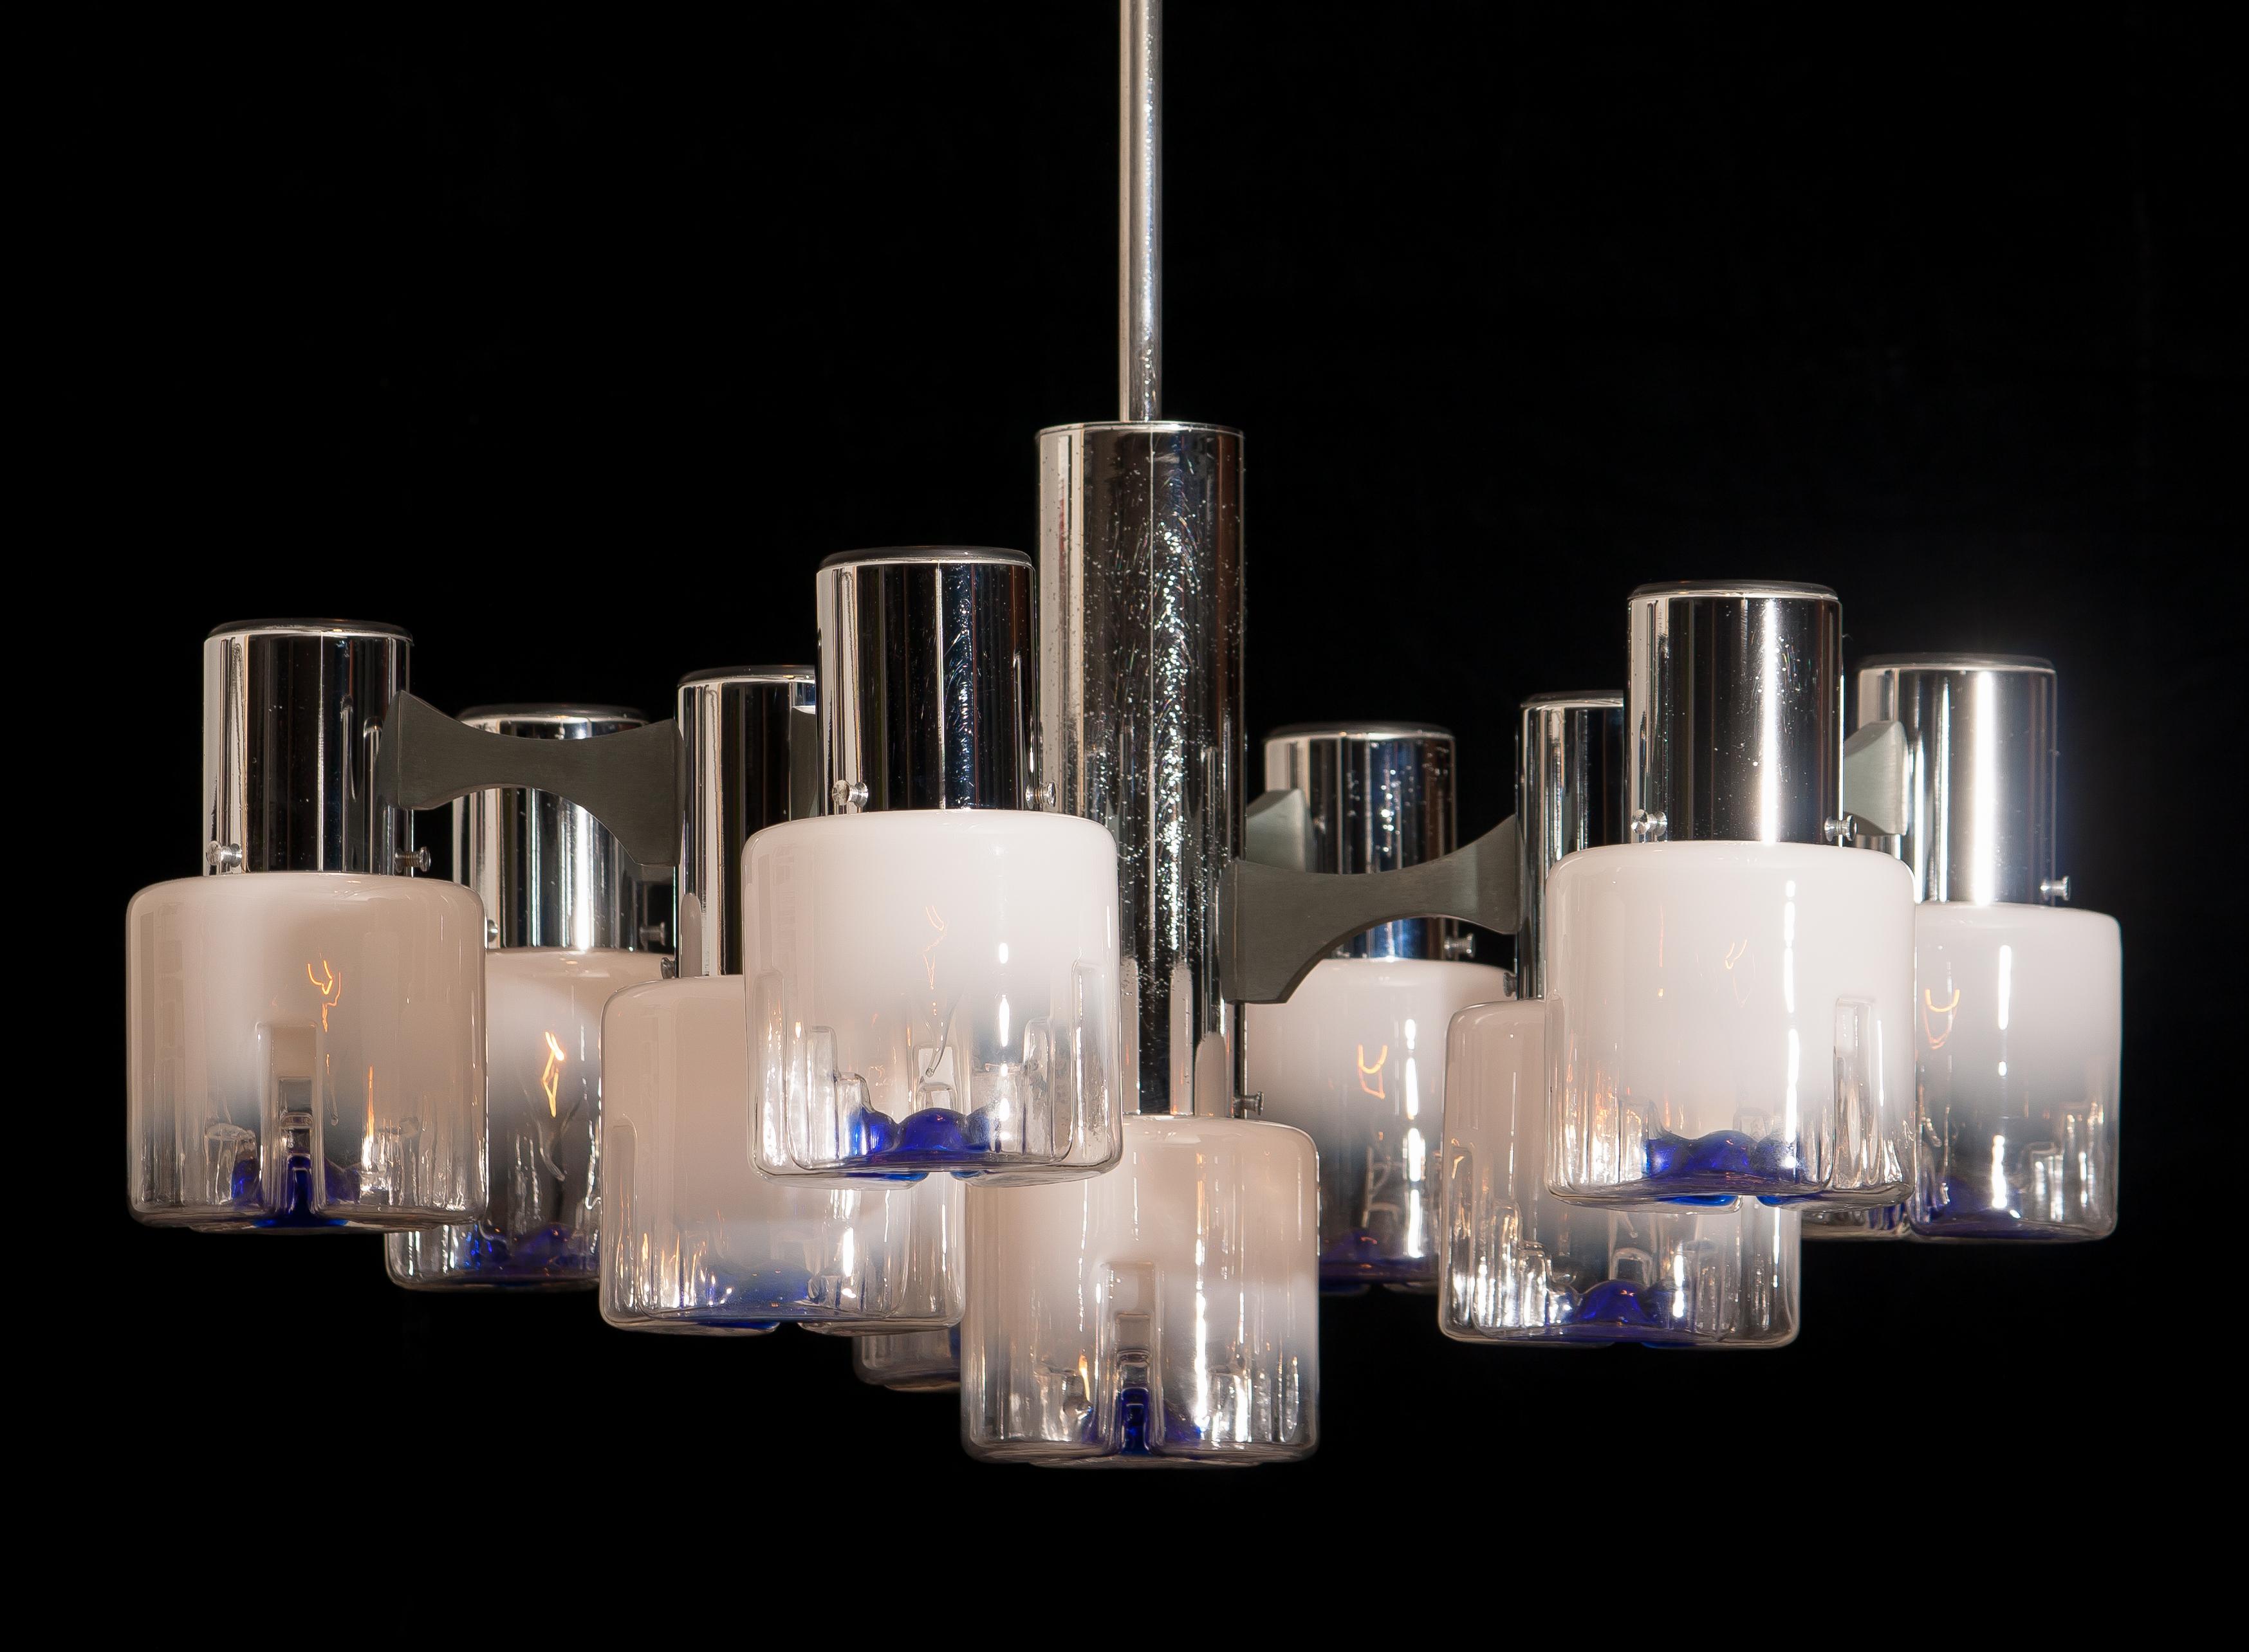 Mazzega chandelier in the fabulous design of the 1970 and filled with Murano crystal overflowing shades.
Chromed steel frame. Ten crystal shades of Murano Mazzega. The shades are overflowing from white to transparent and in the bottom a blue